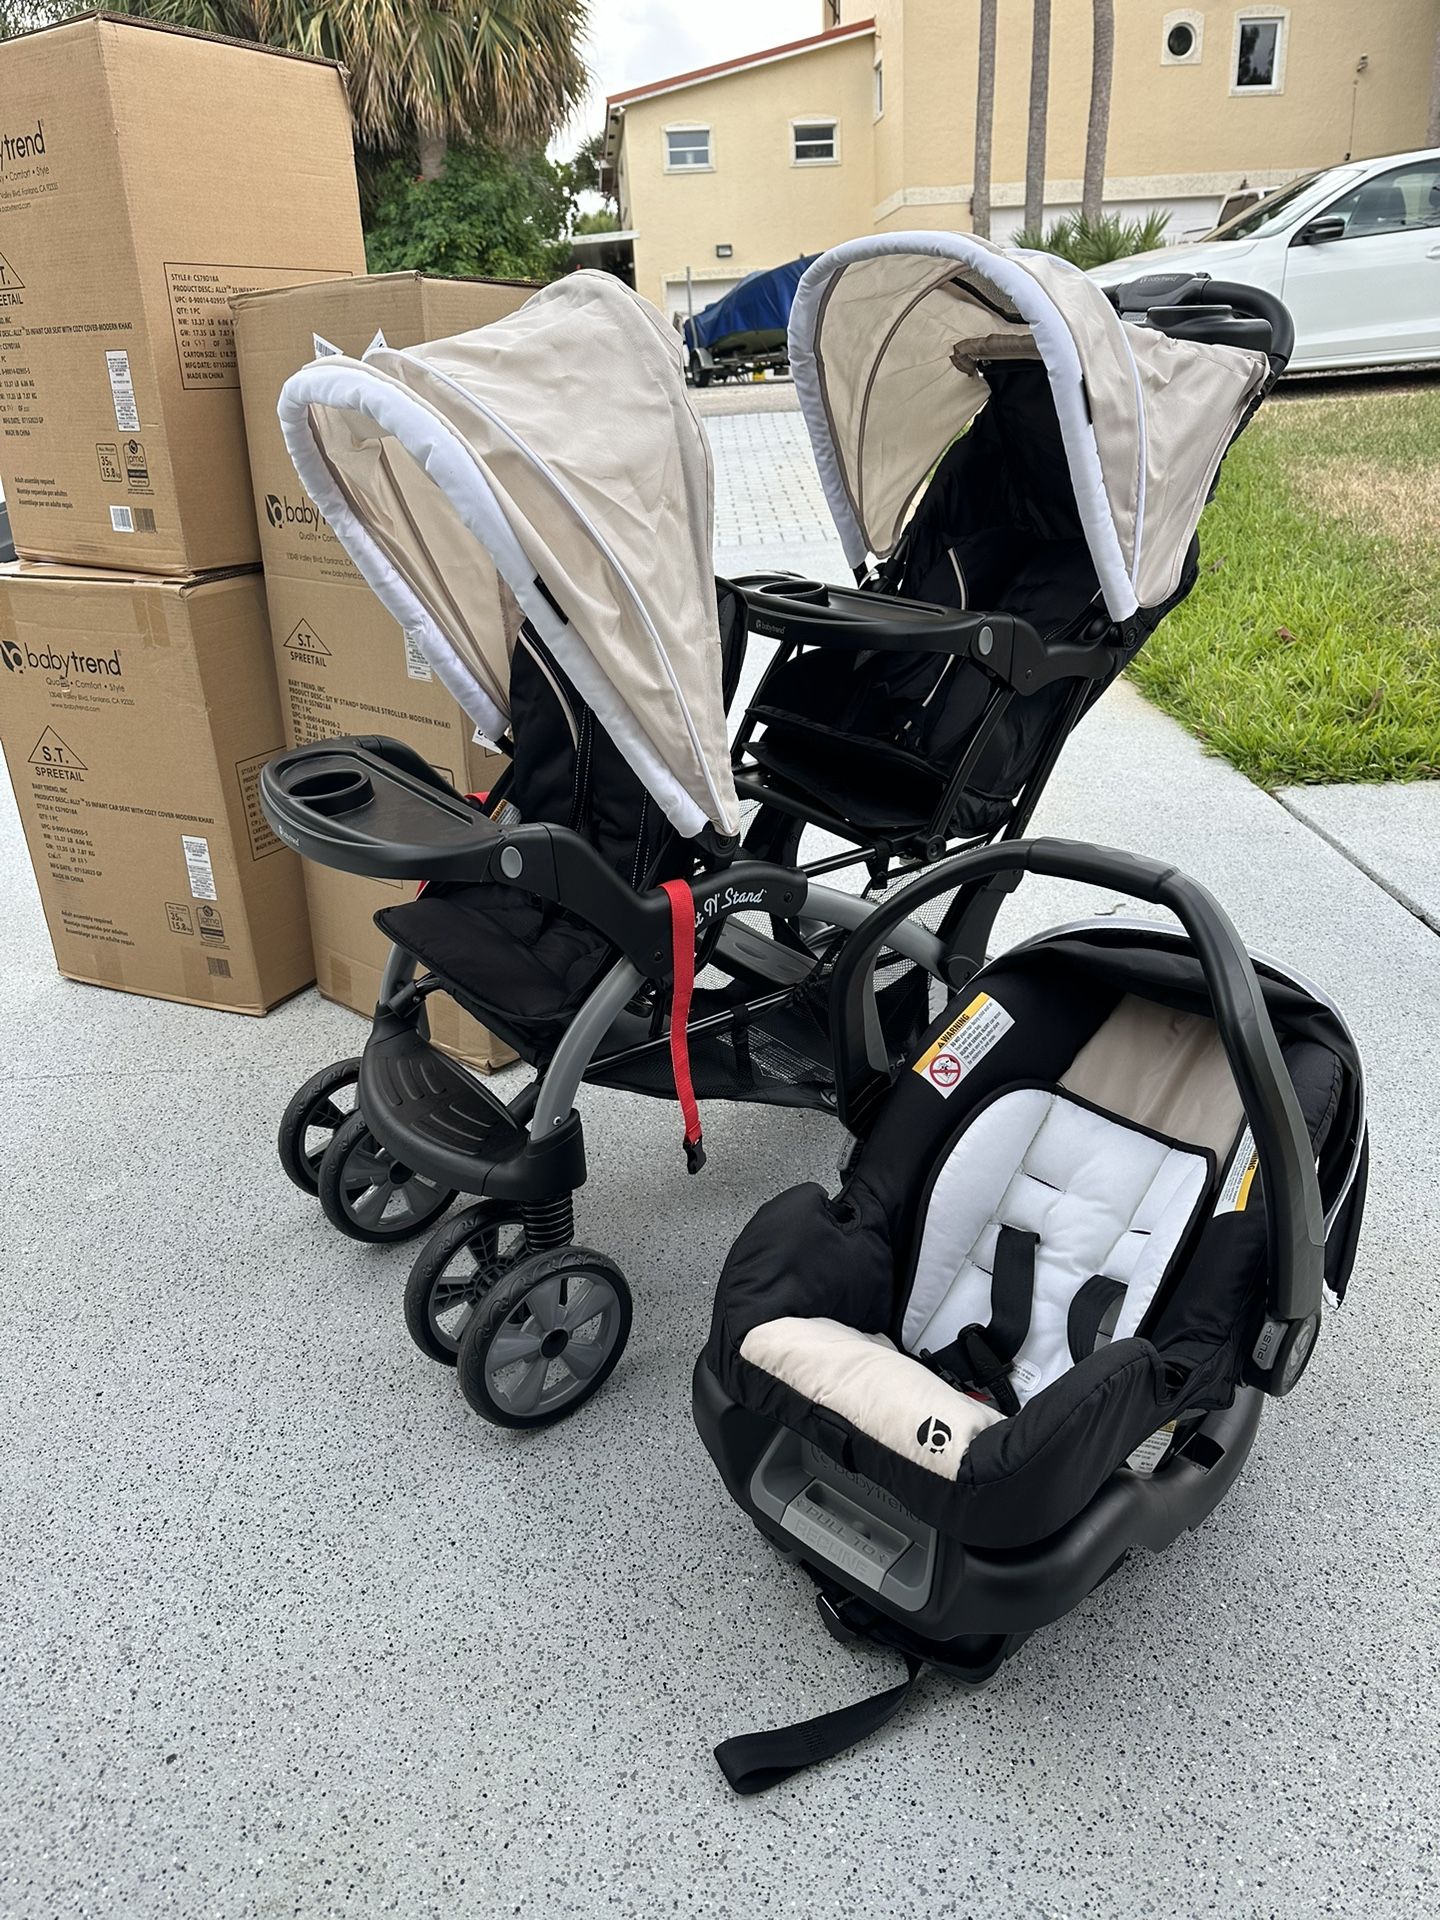 Baby Trend Sit N Stand Double Baby Stroller And 2 Infant Car Seat System. 